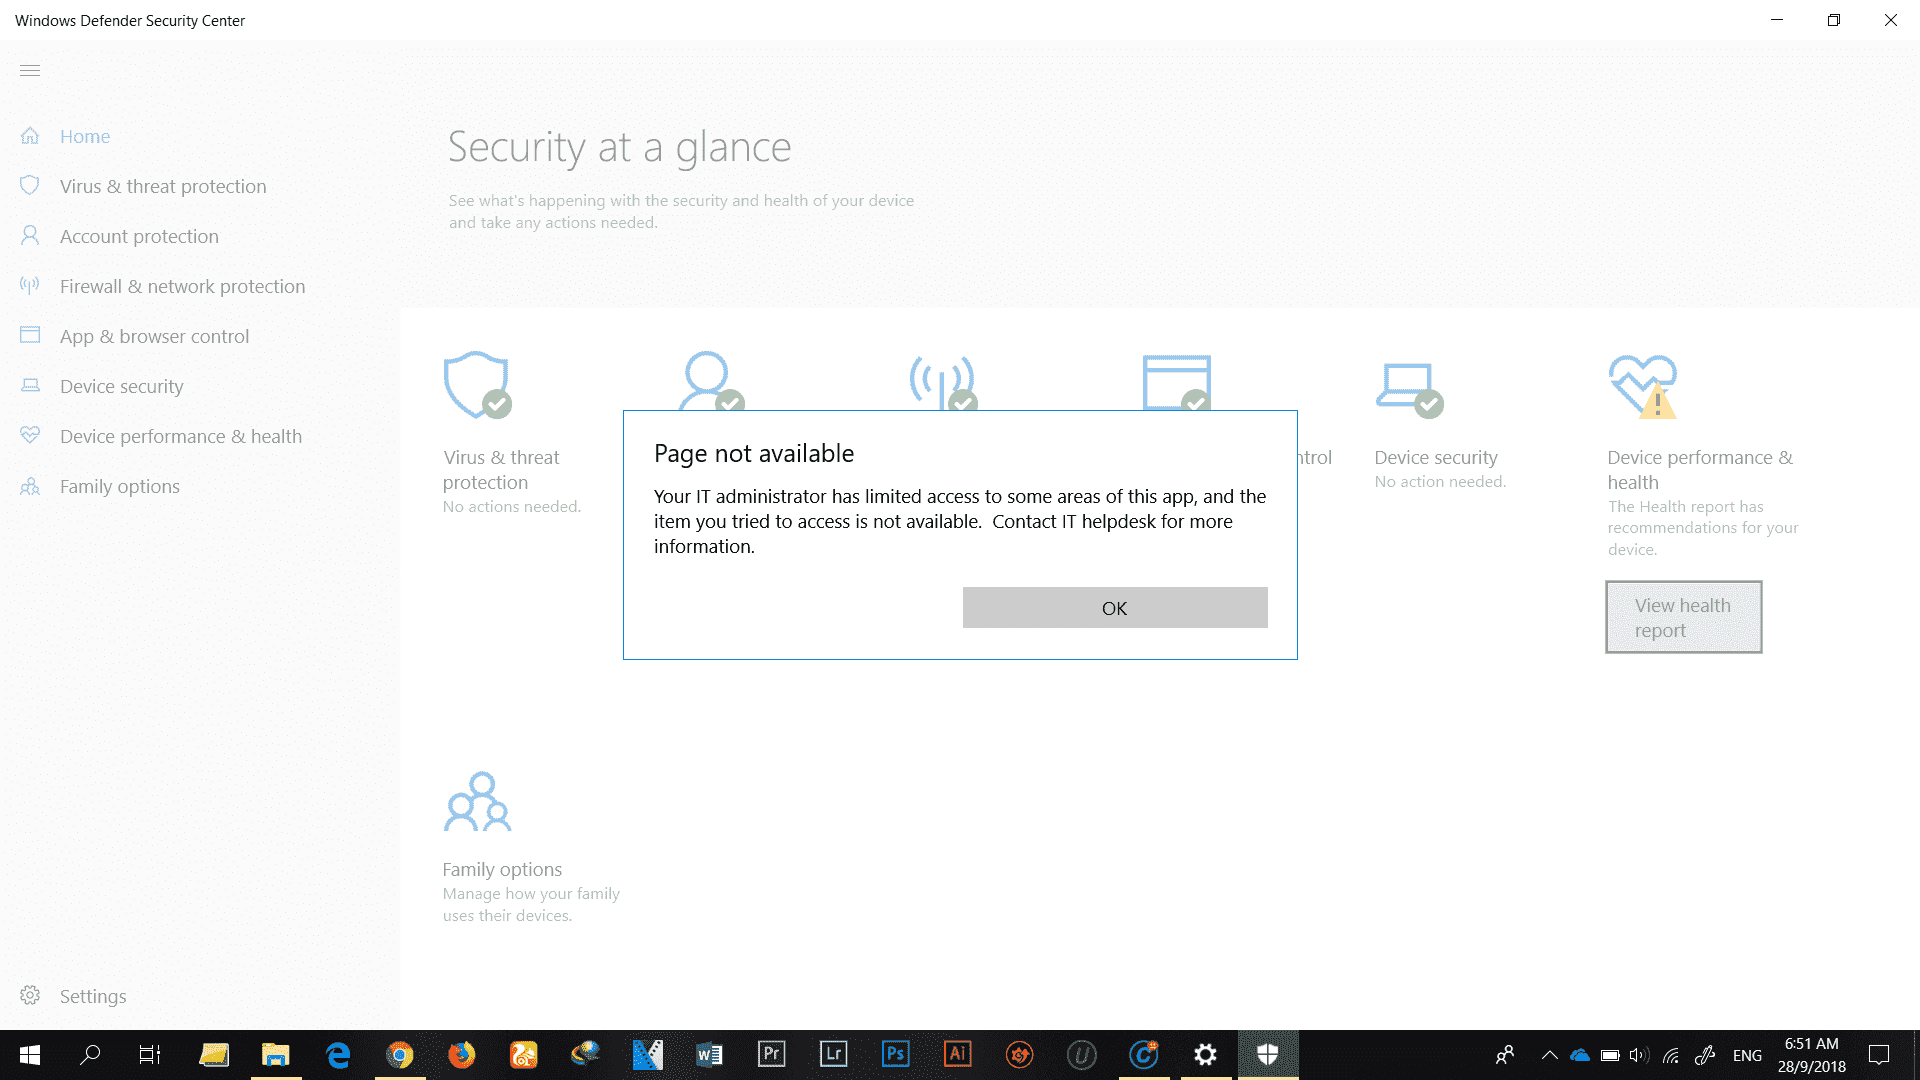 My defender icon in taskbarcsuddenly went MISSING, "Your IT Administrator disabled access"... 28c7705e-7645-45f2-b51b-51662b336978?upload=true.png